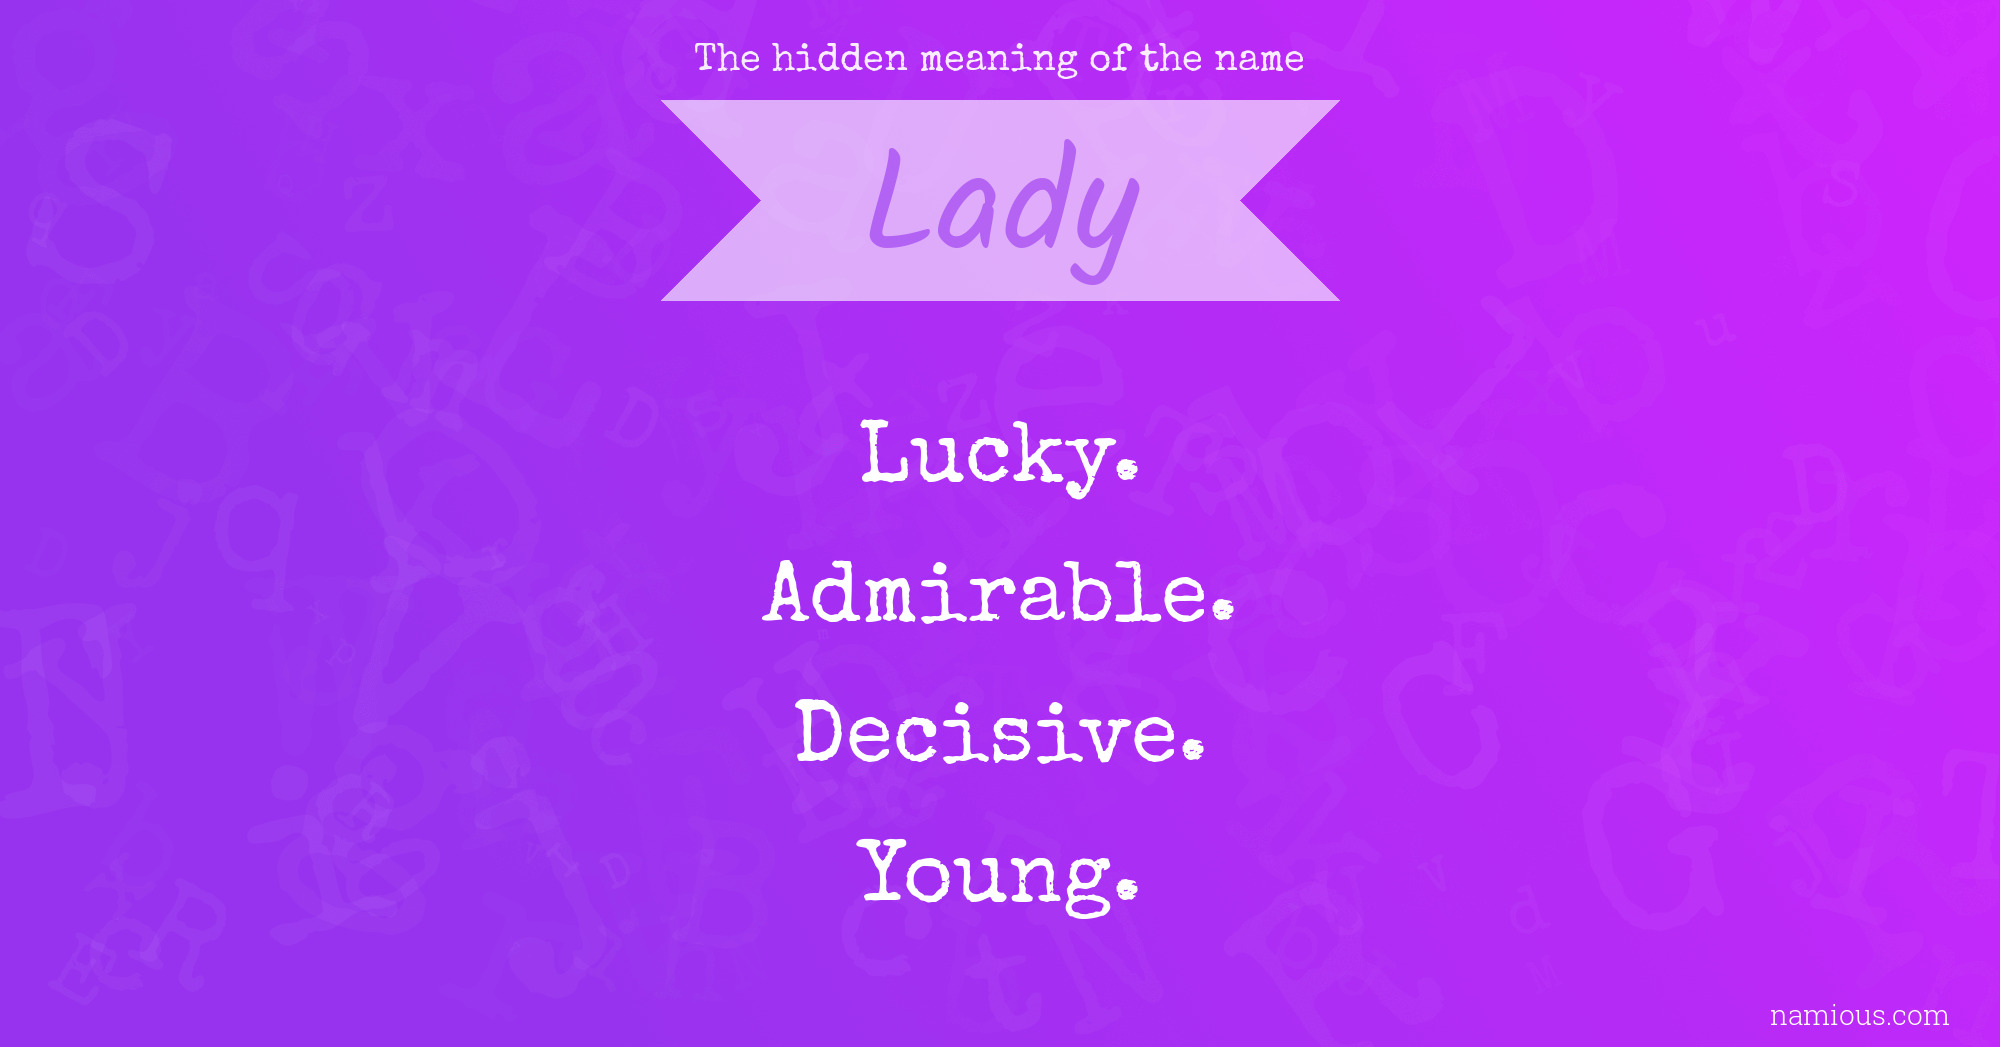 The Hidden Meaning Of The Name Lady Namious So they seem very satisfied! the hidden meaning of the name lady